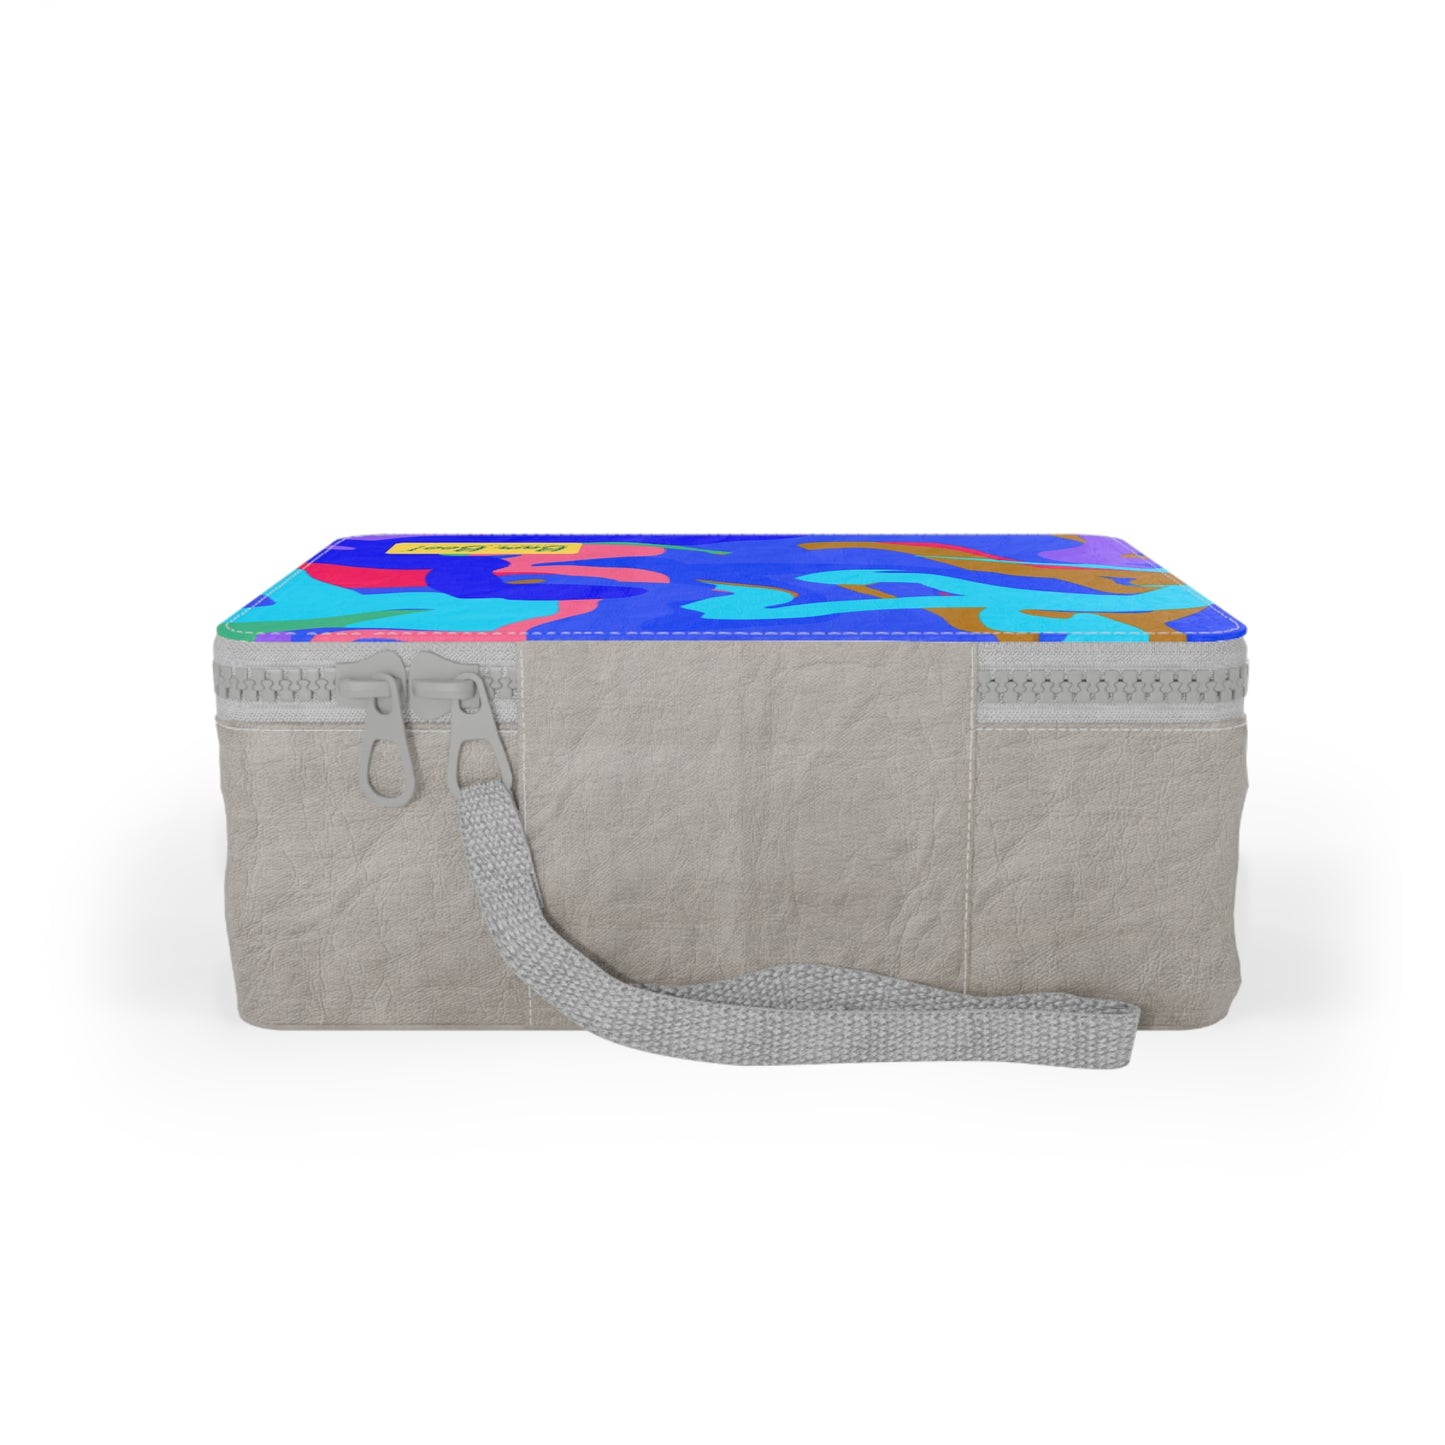 "Dynamic Balance: An Abstract Exploration of Motion Through Color and Shapes" - Bam Boo! Lifestyle Eco-friendly Paper Lunch Bag